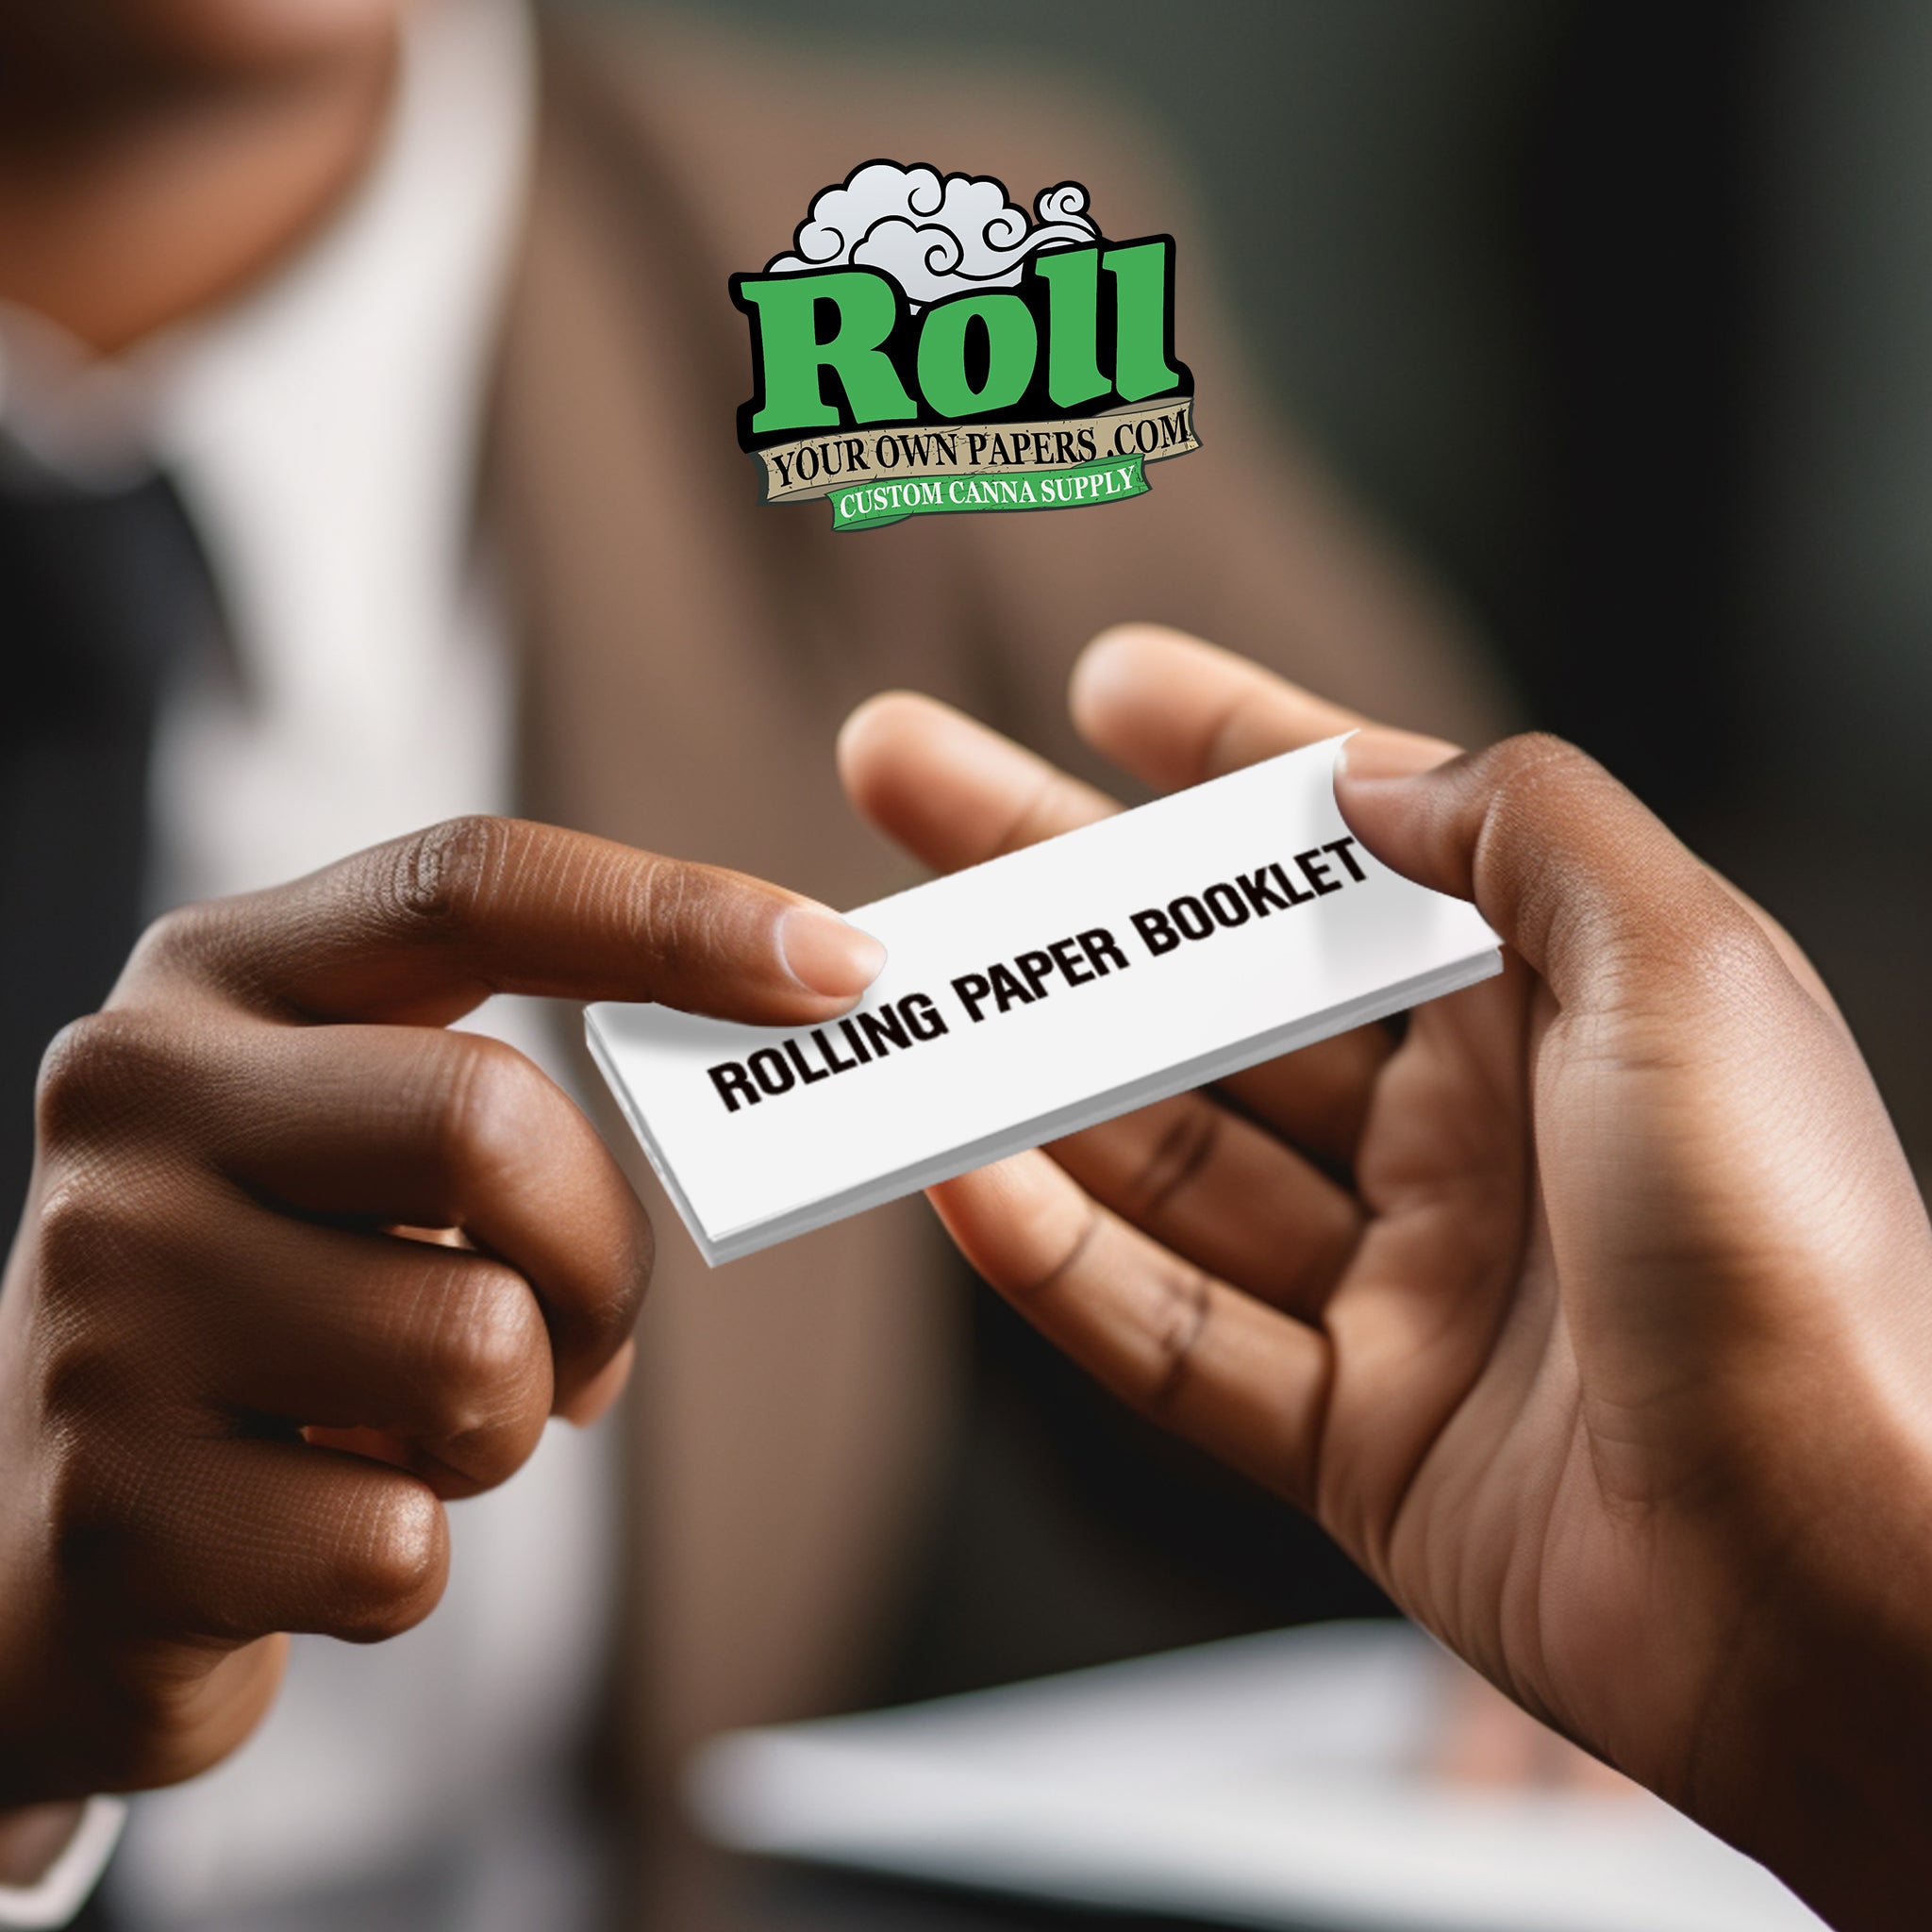 Rolling Paper Business Cards